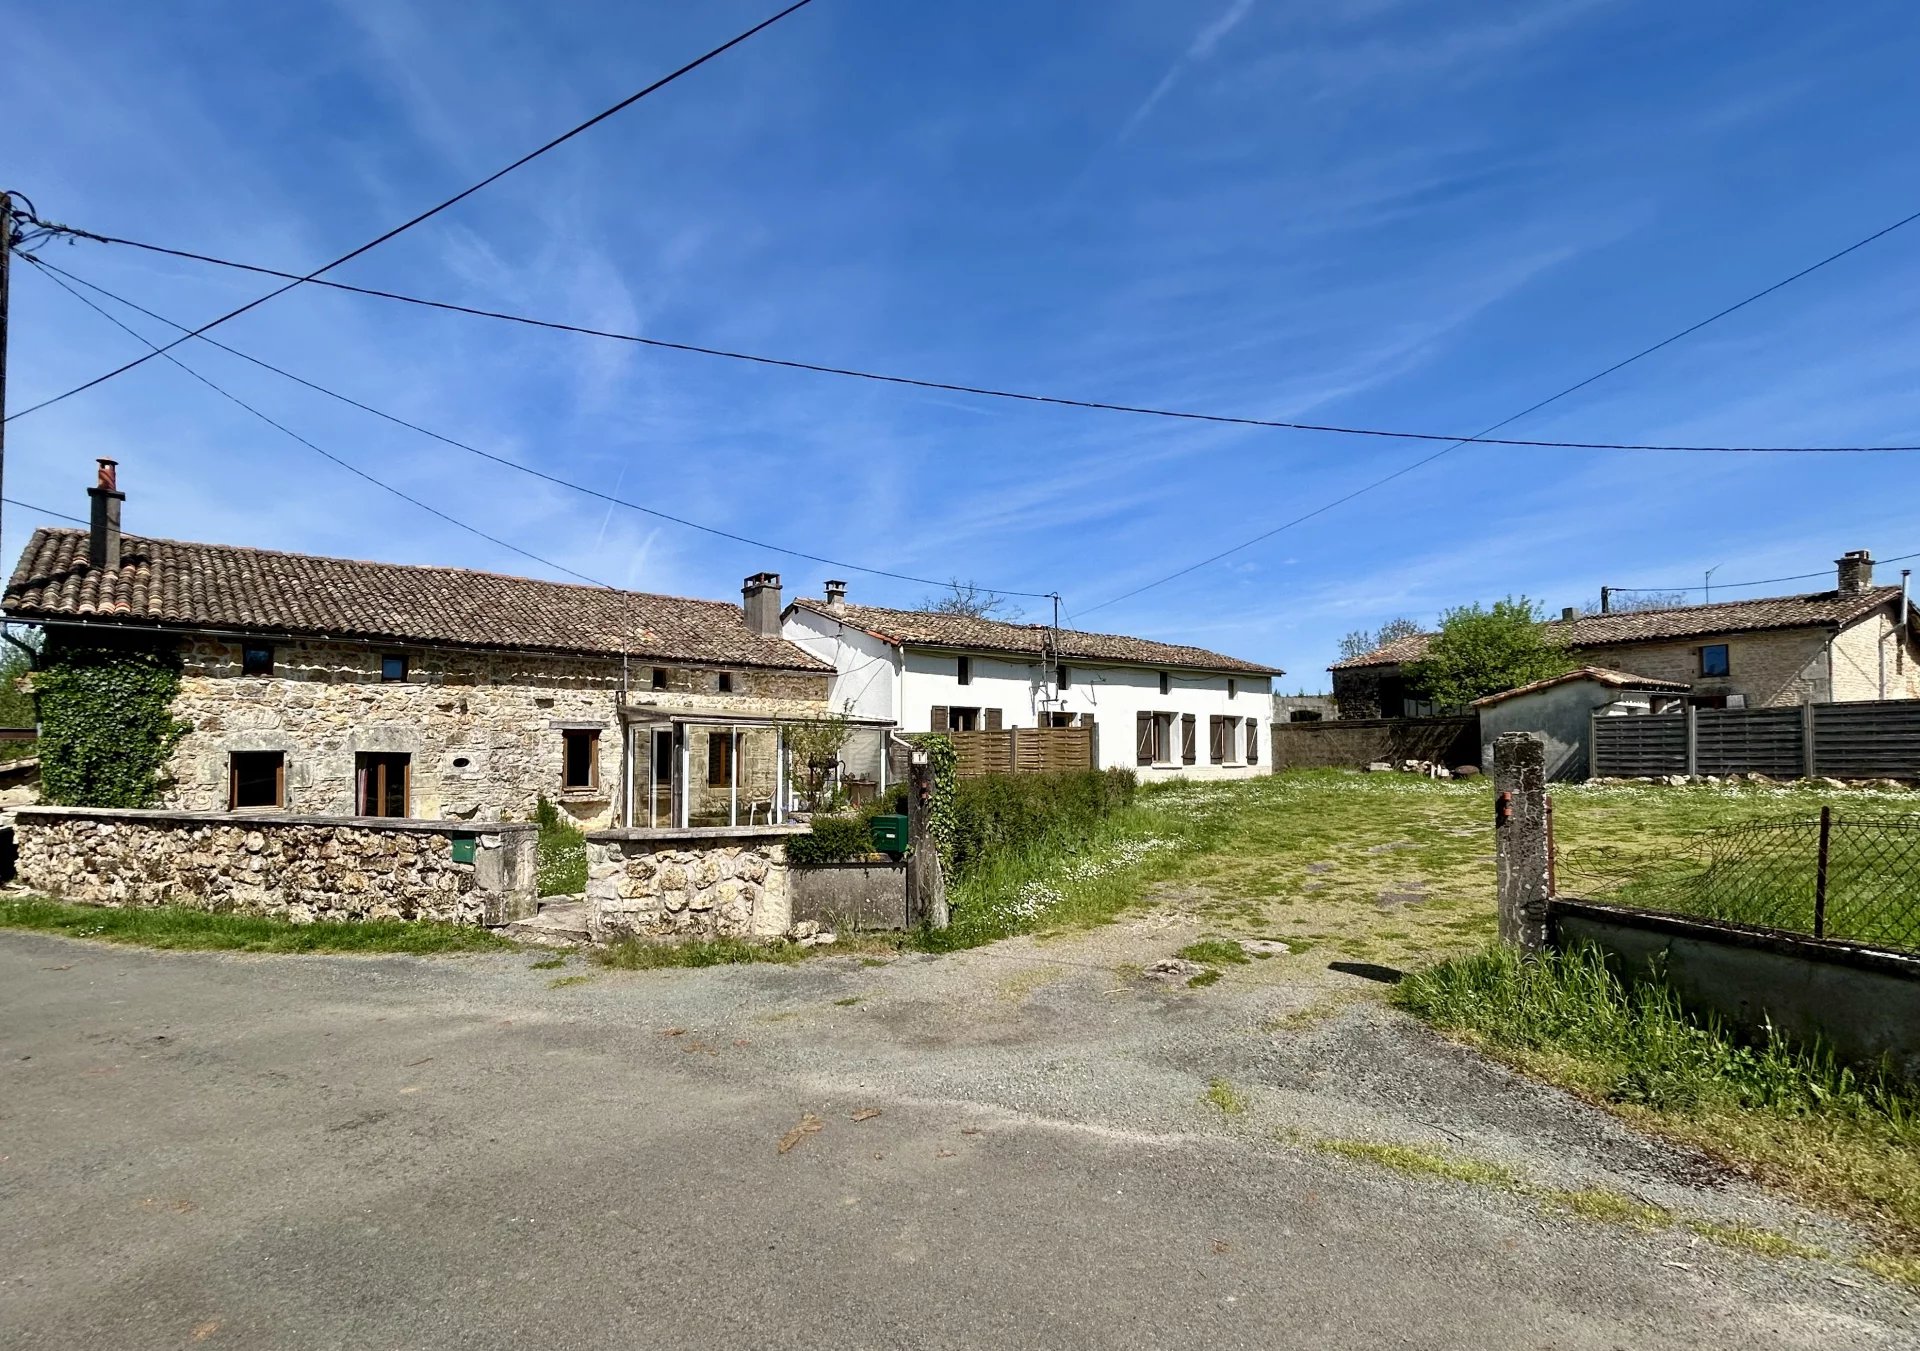 3 renovated village houses with outbuildings and 4500m2 of land